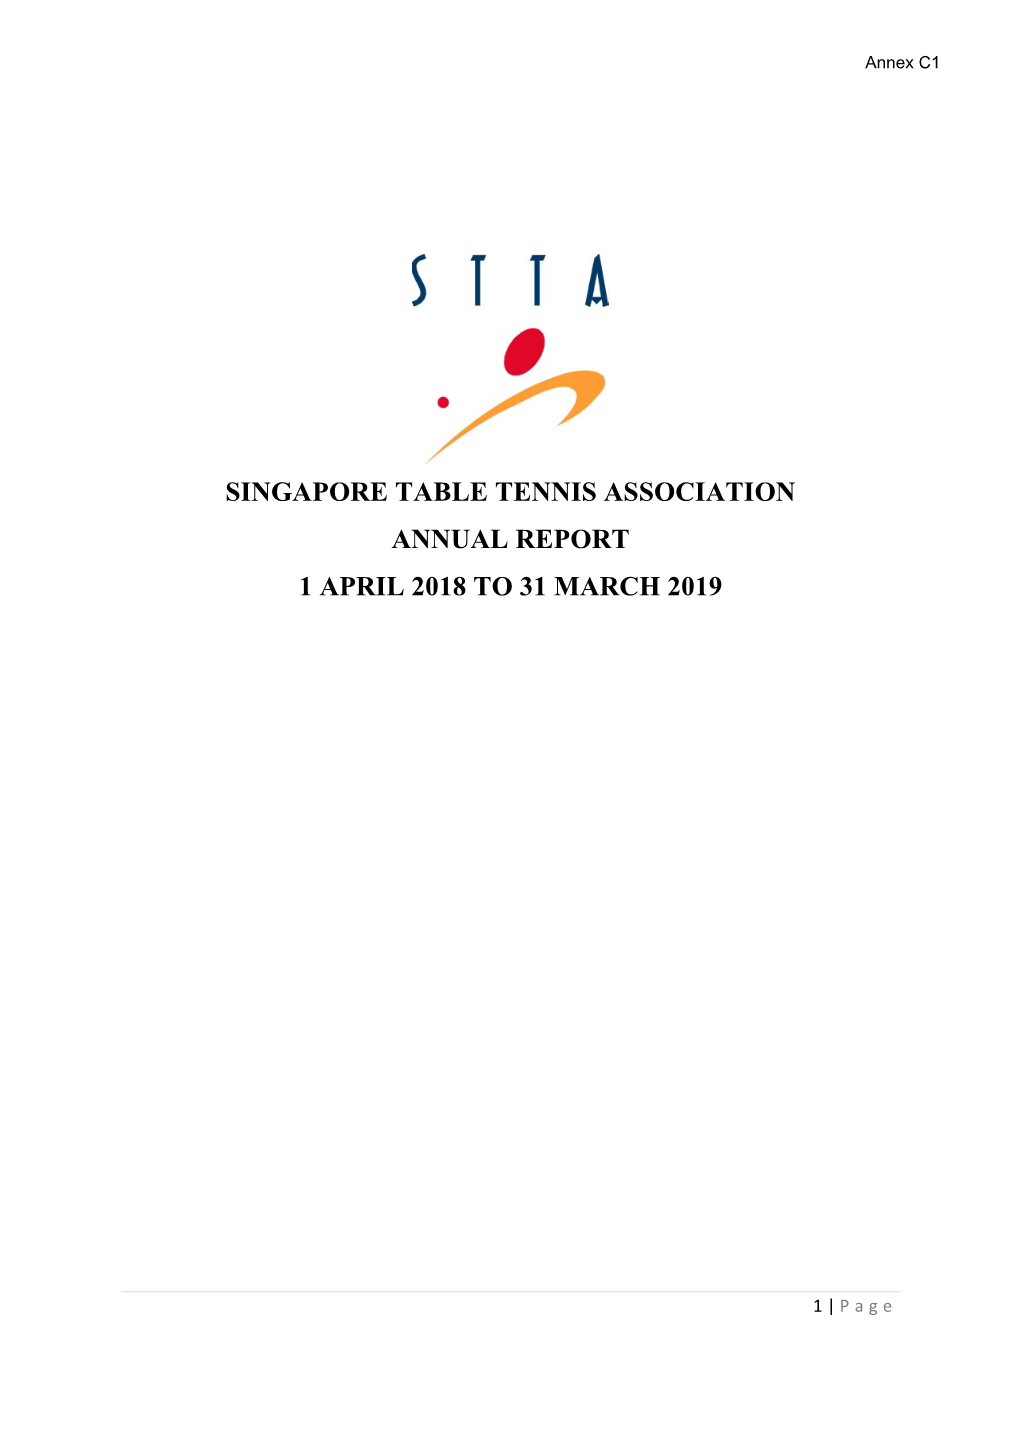 Singapore Table Tennis Association Annual Report 1 April 2018 to 31 March 2019